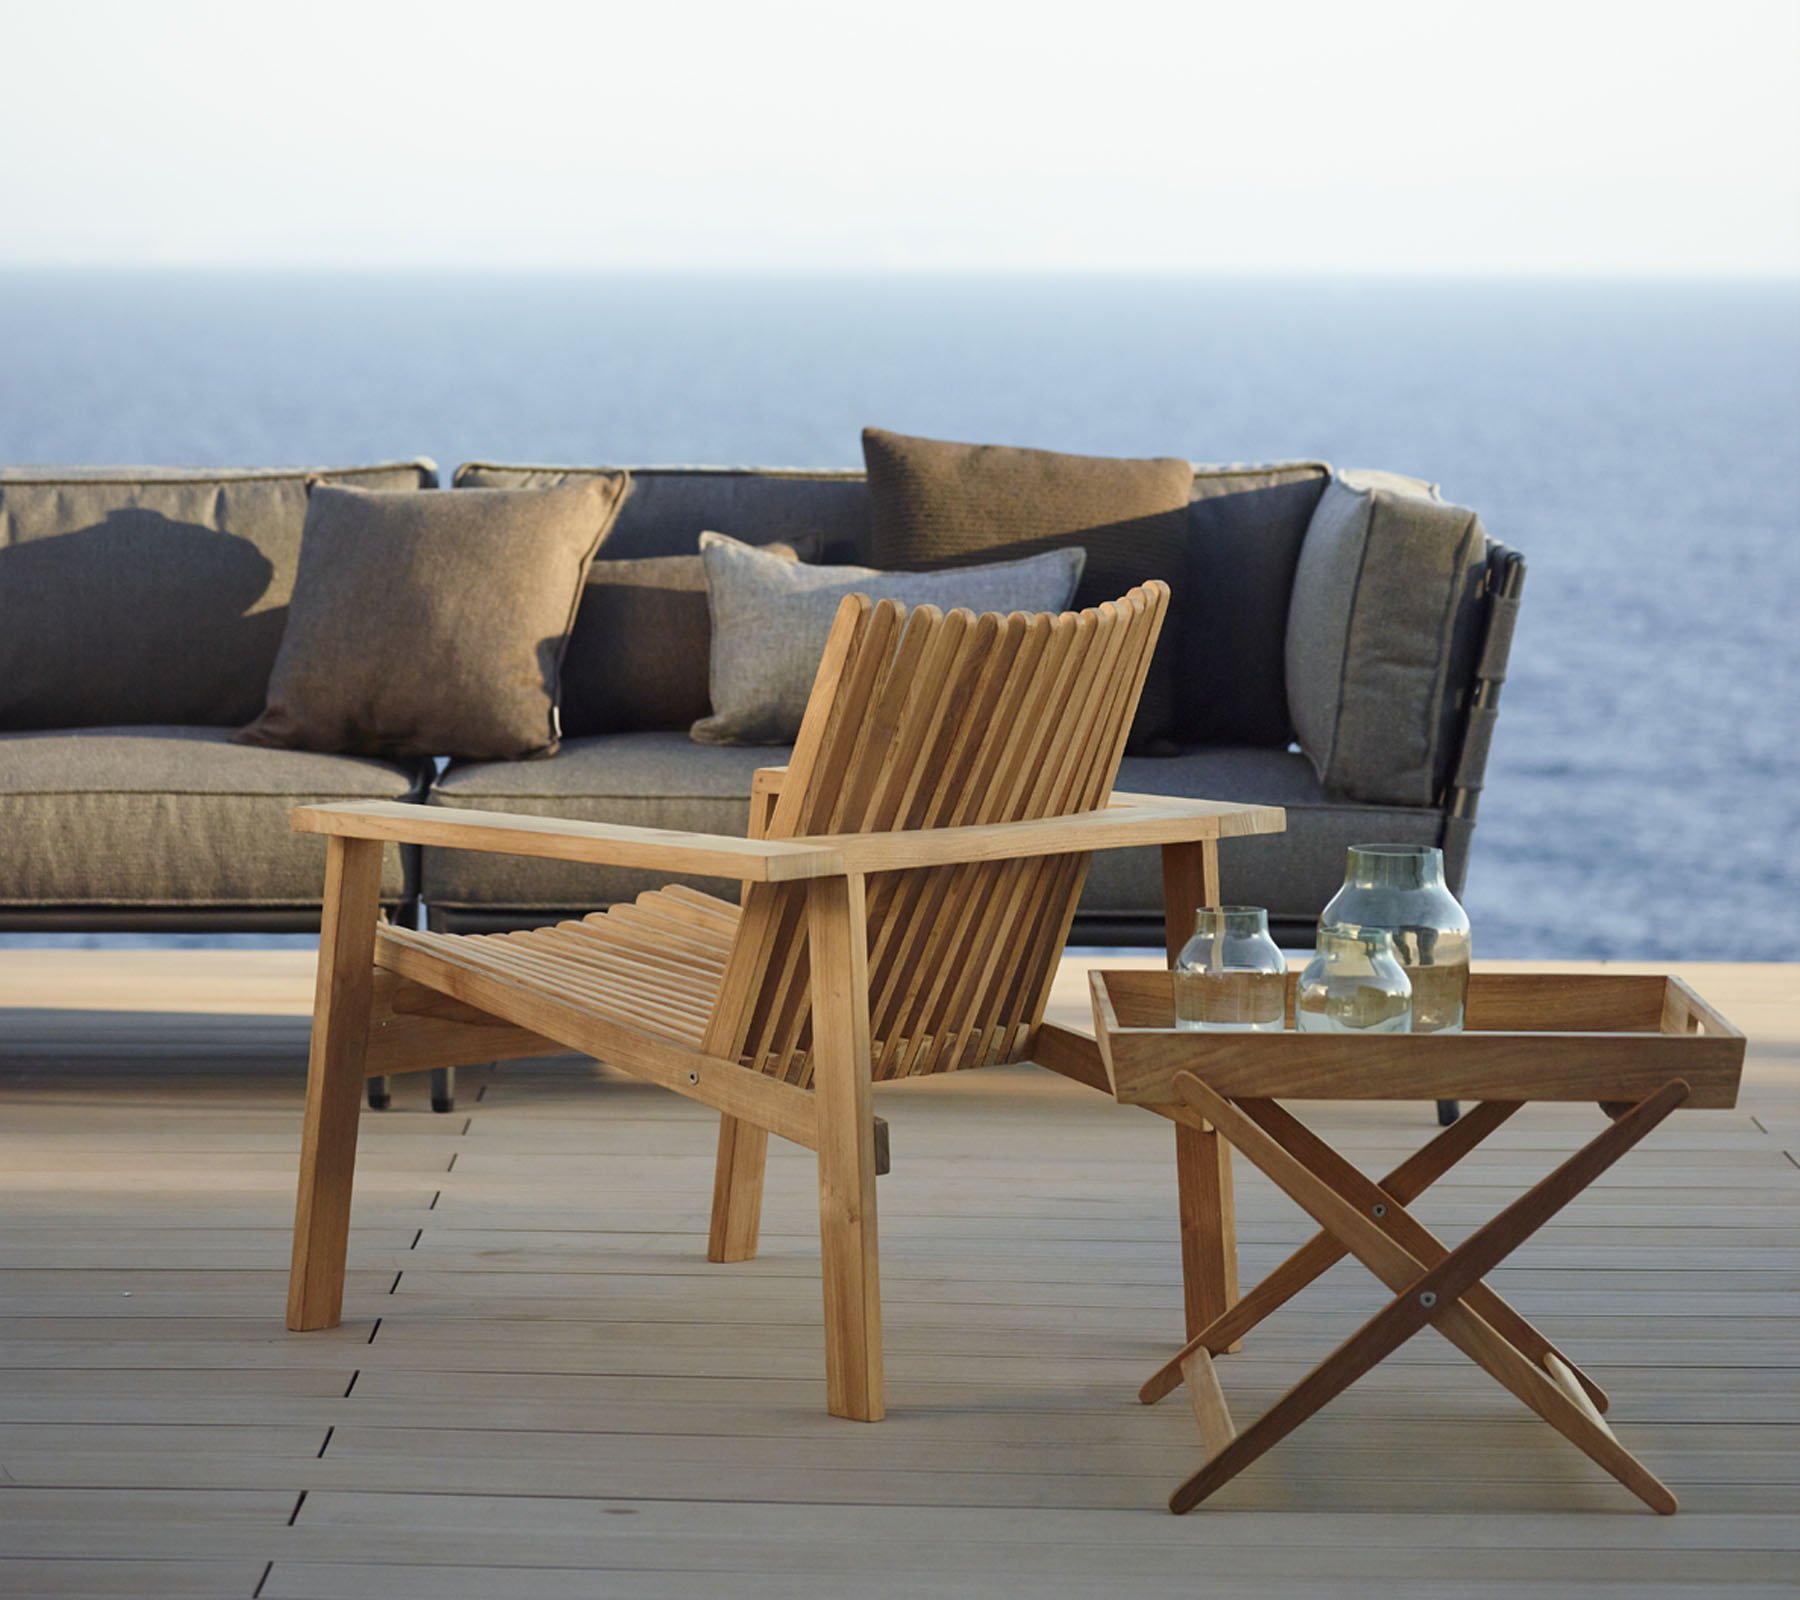 Cane-line Amaze Lounge Chair | Wooden | Outdoor-Patio Furniture - Ultra ...